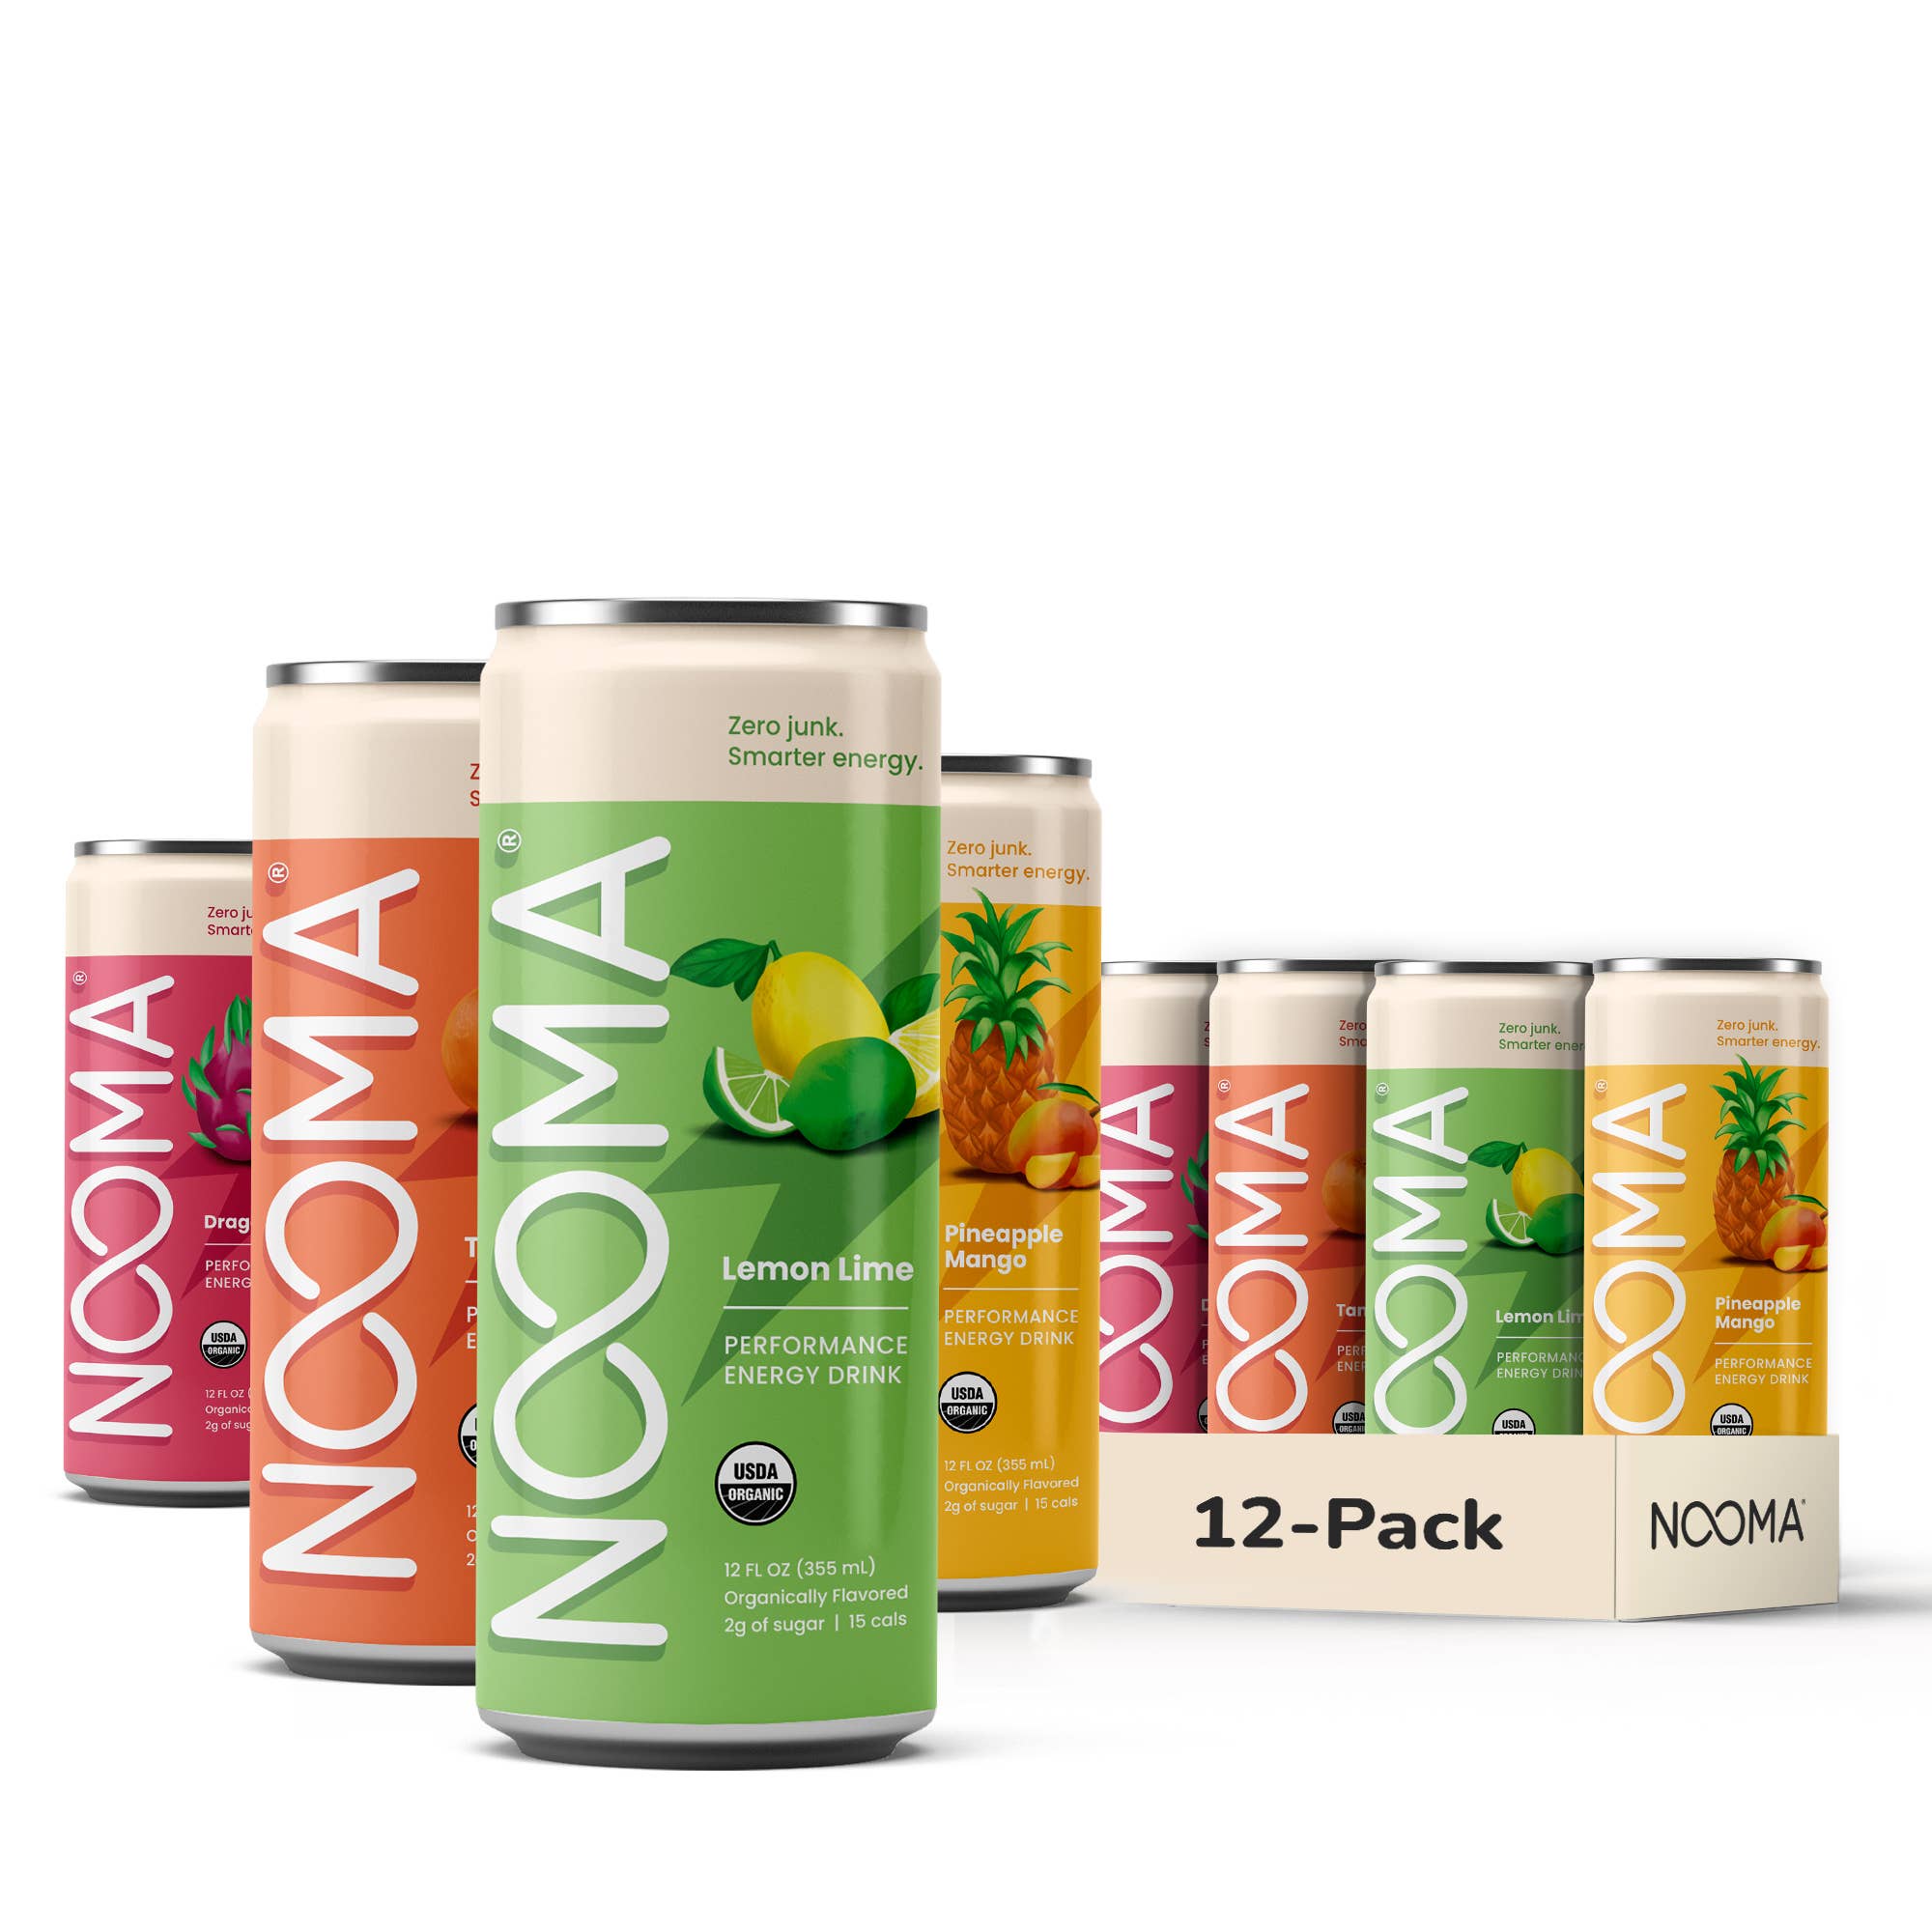 NOOMA wholesale products